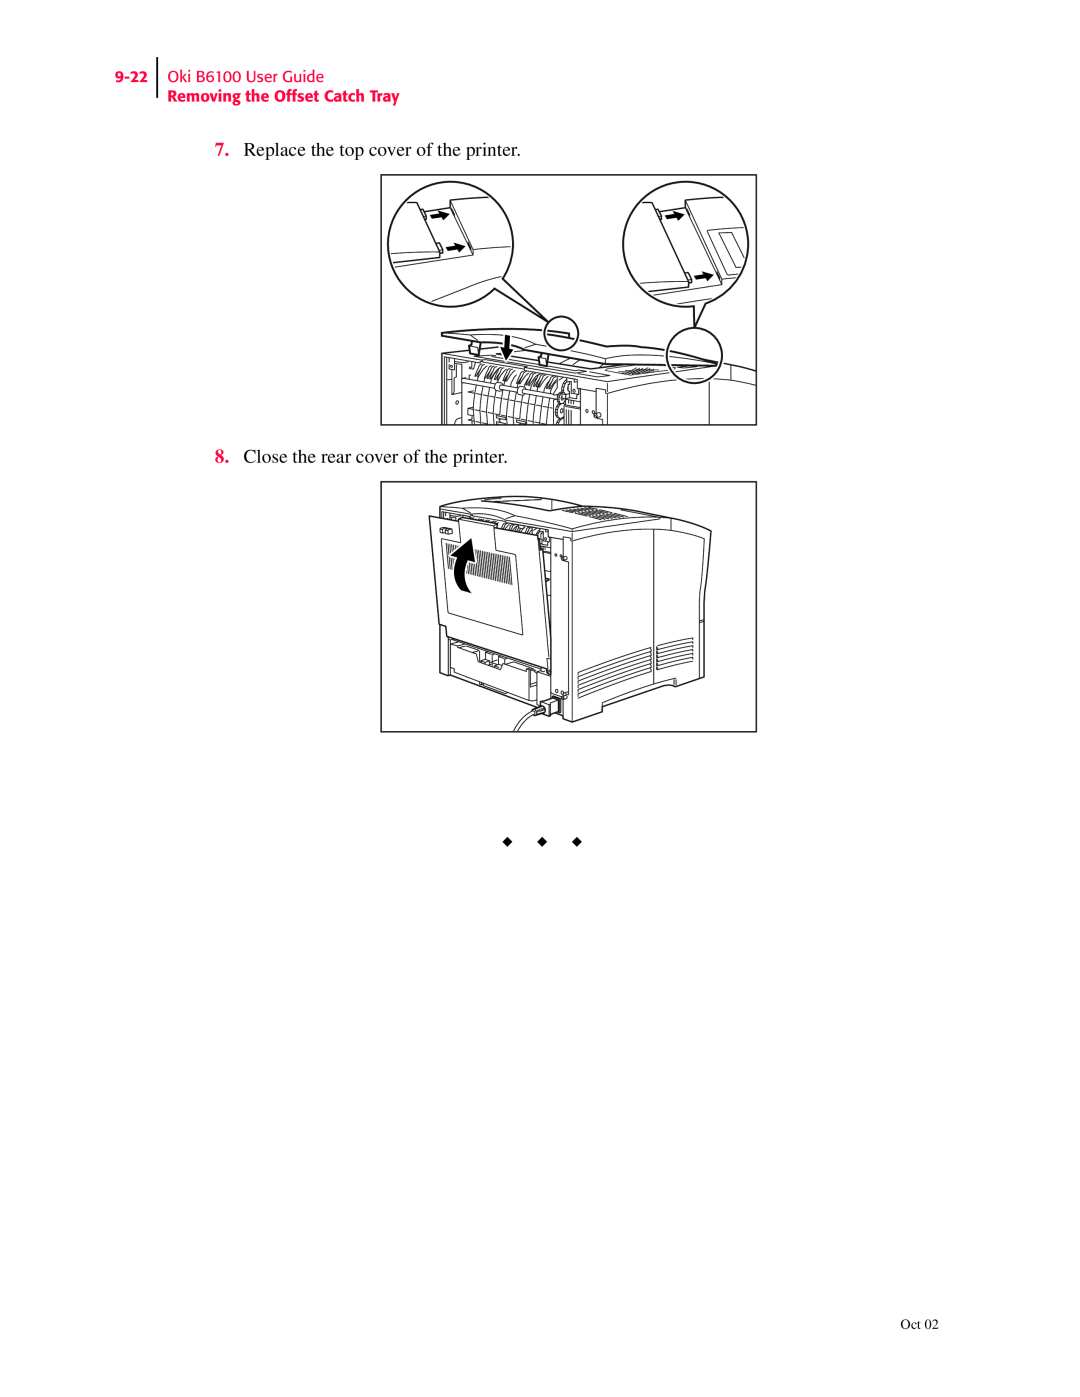 Oki 6100 manual Replace the top cover of the printer, Close the rear cover of the printer 